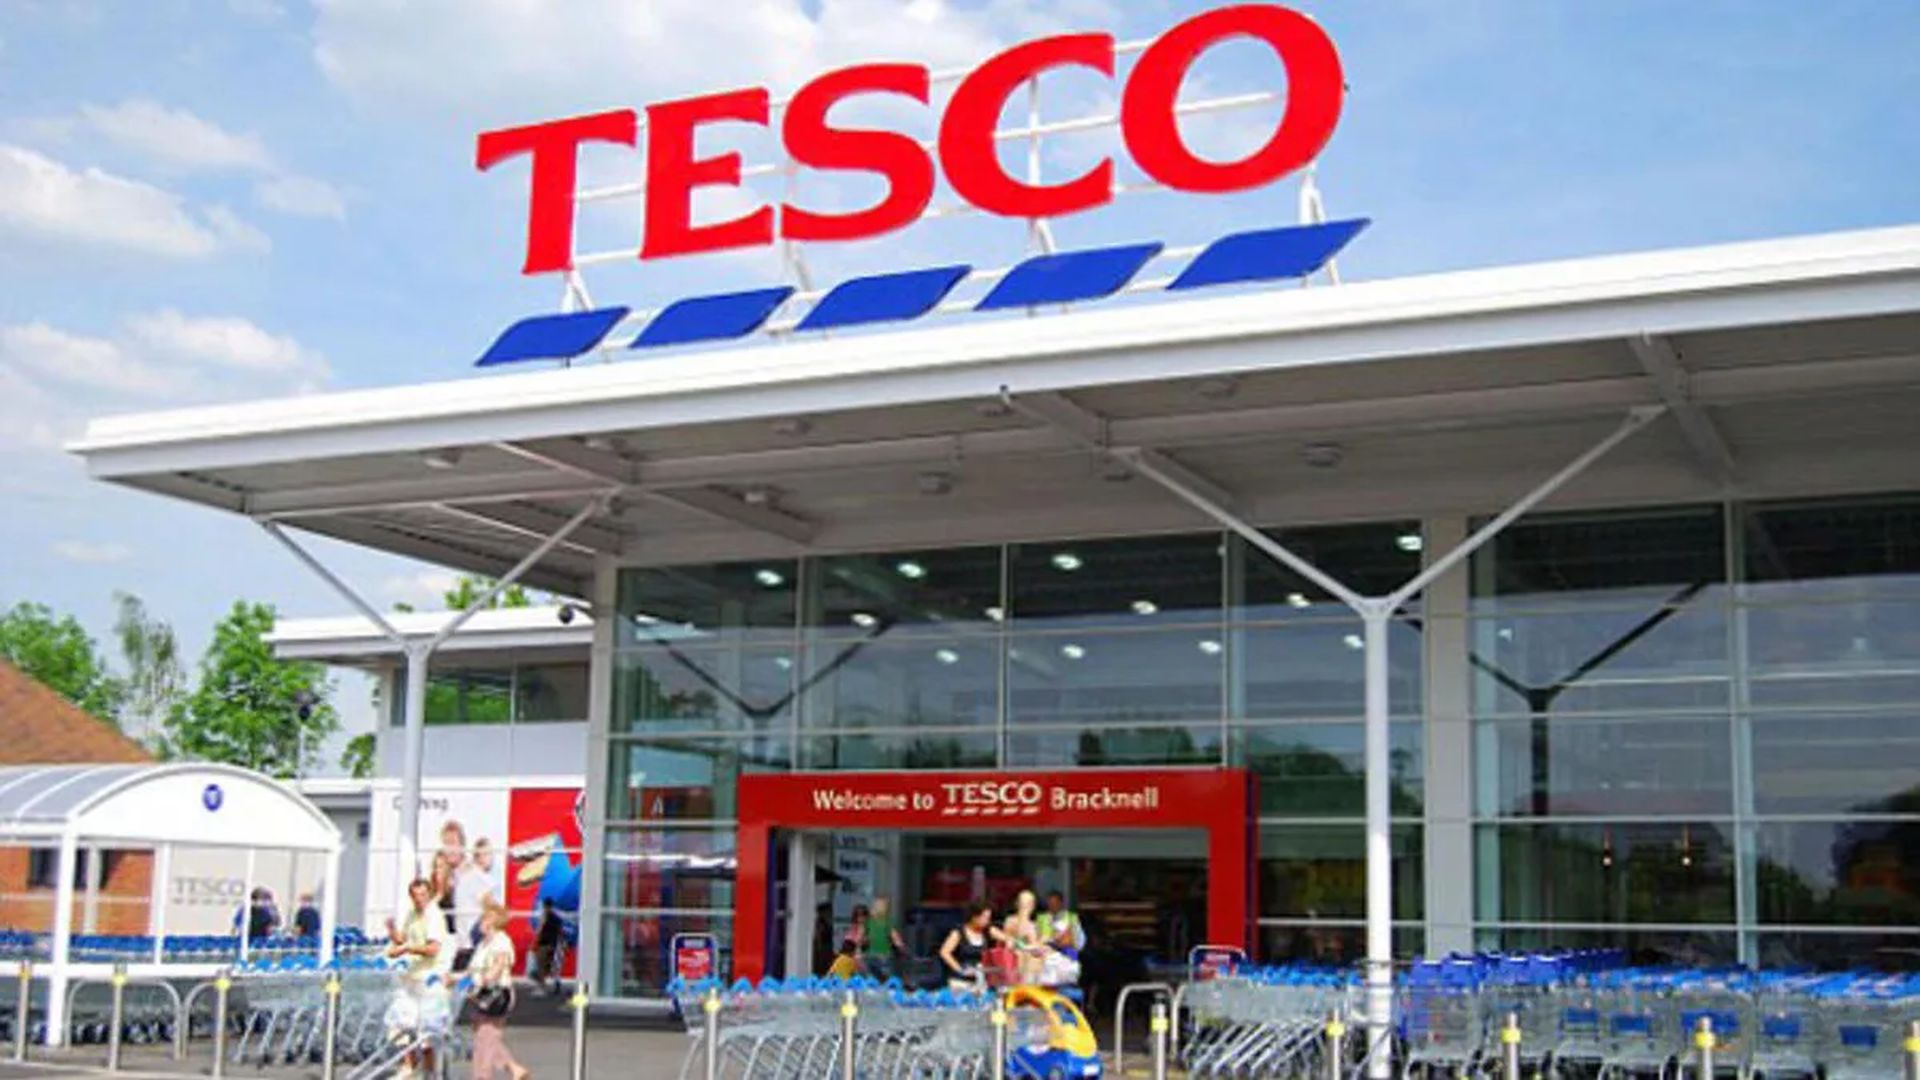 How to book Tesco Christmas delivery slot?